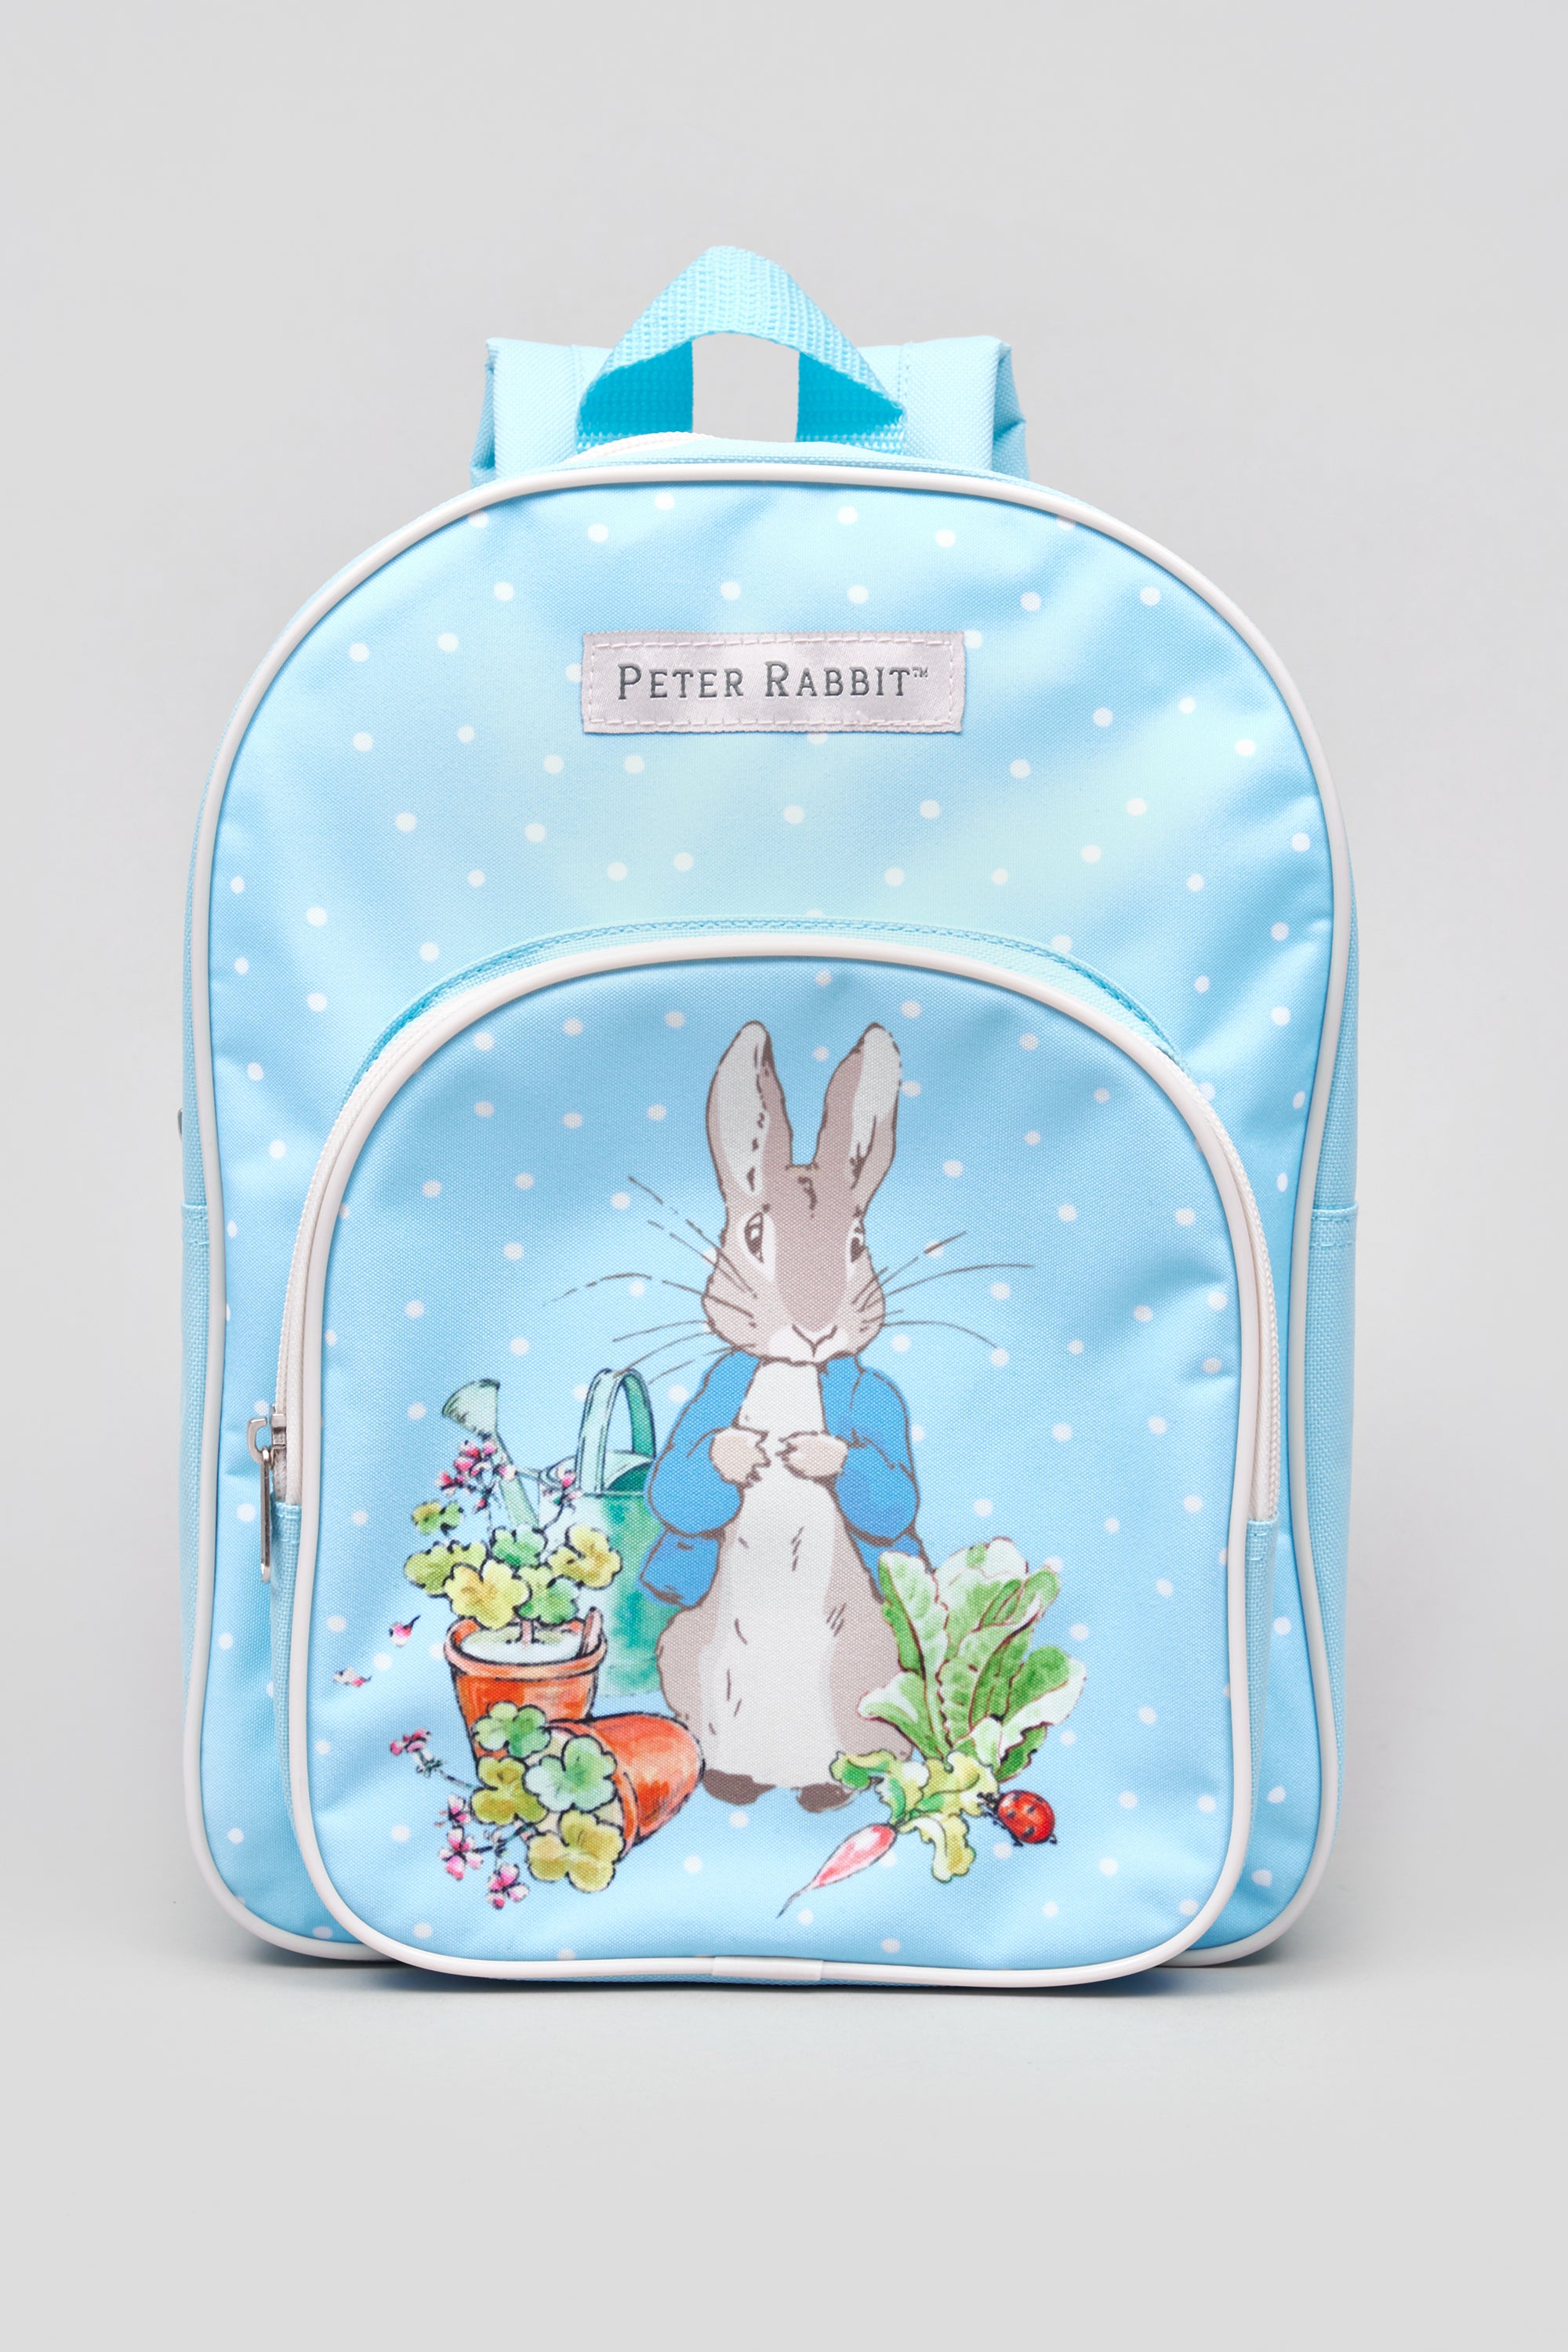 PETER RABBIT BLUE POLKA DOT CLASSIC ARCH BACKPACK